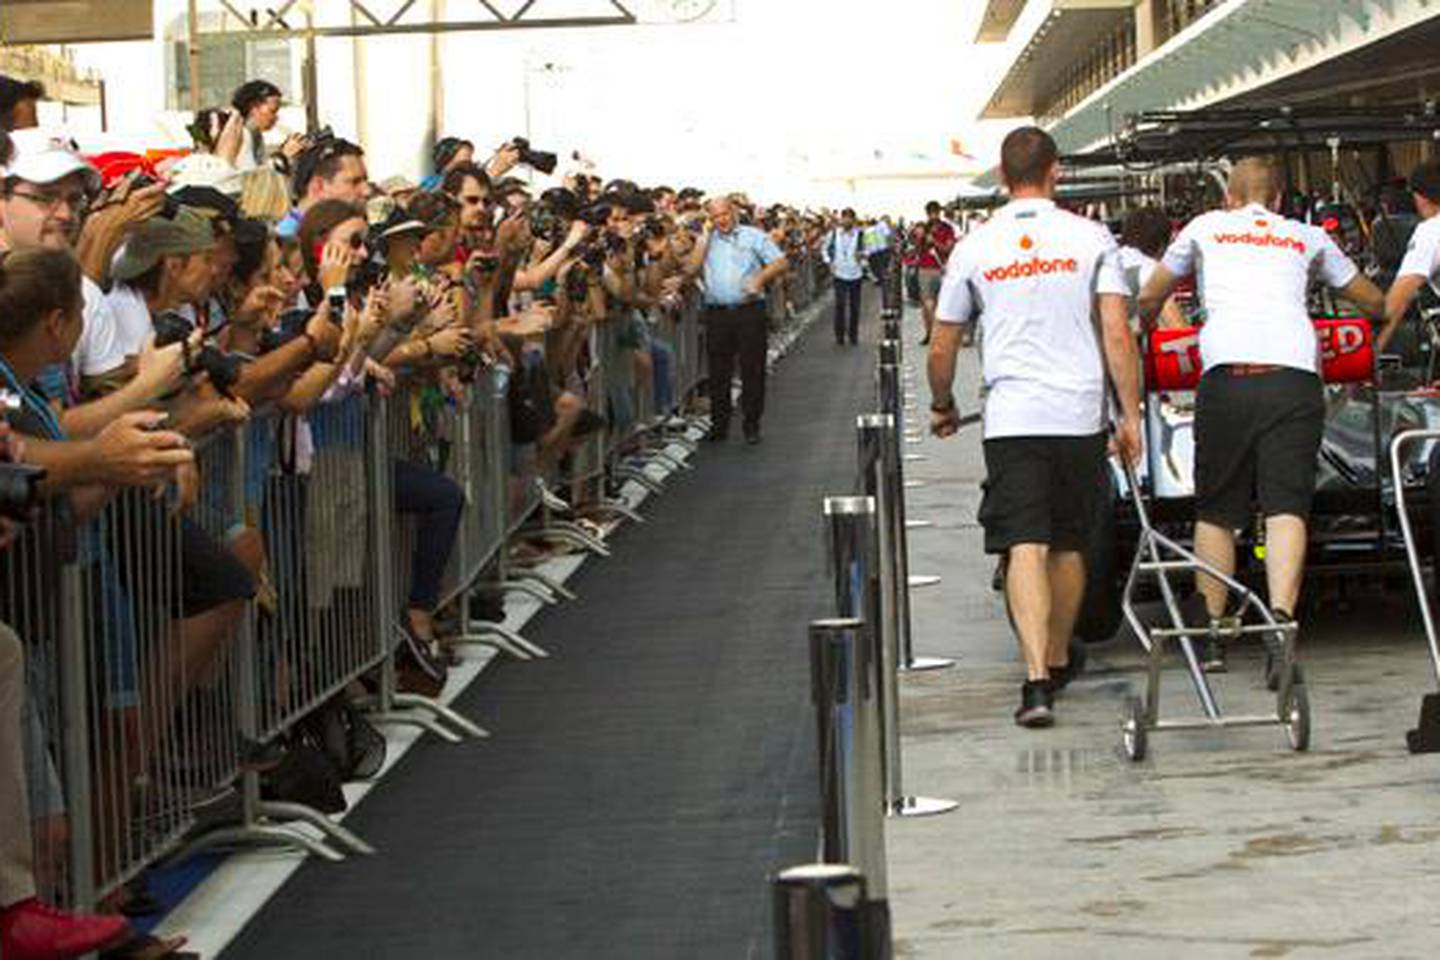 Video: Fans get preview of F1 action on Yas Marina Circuit